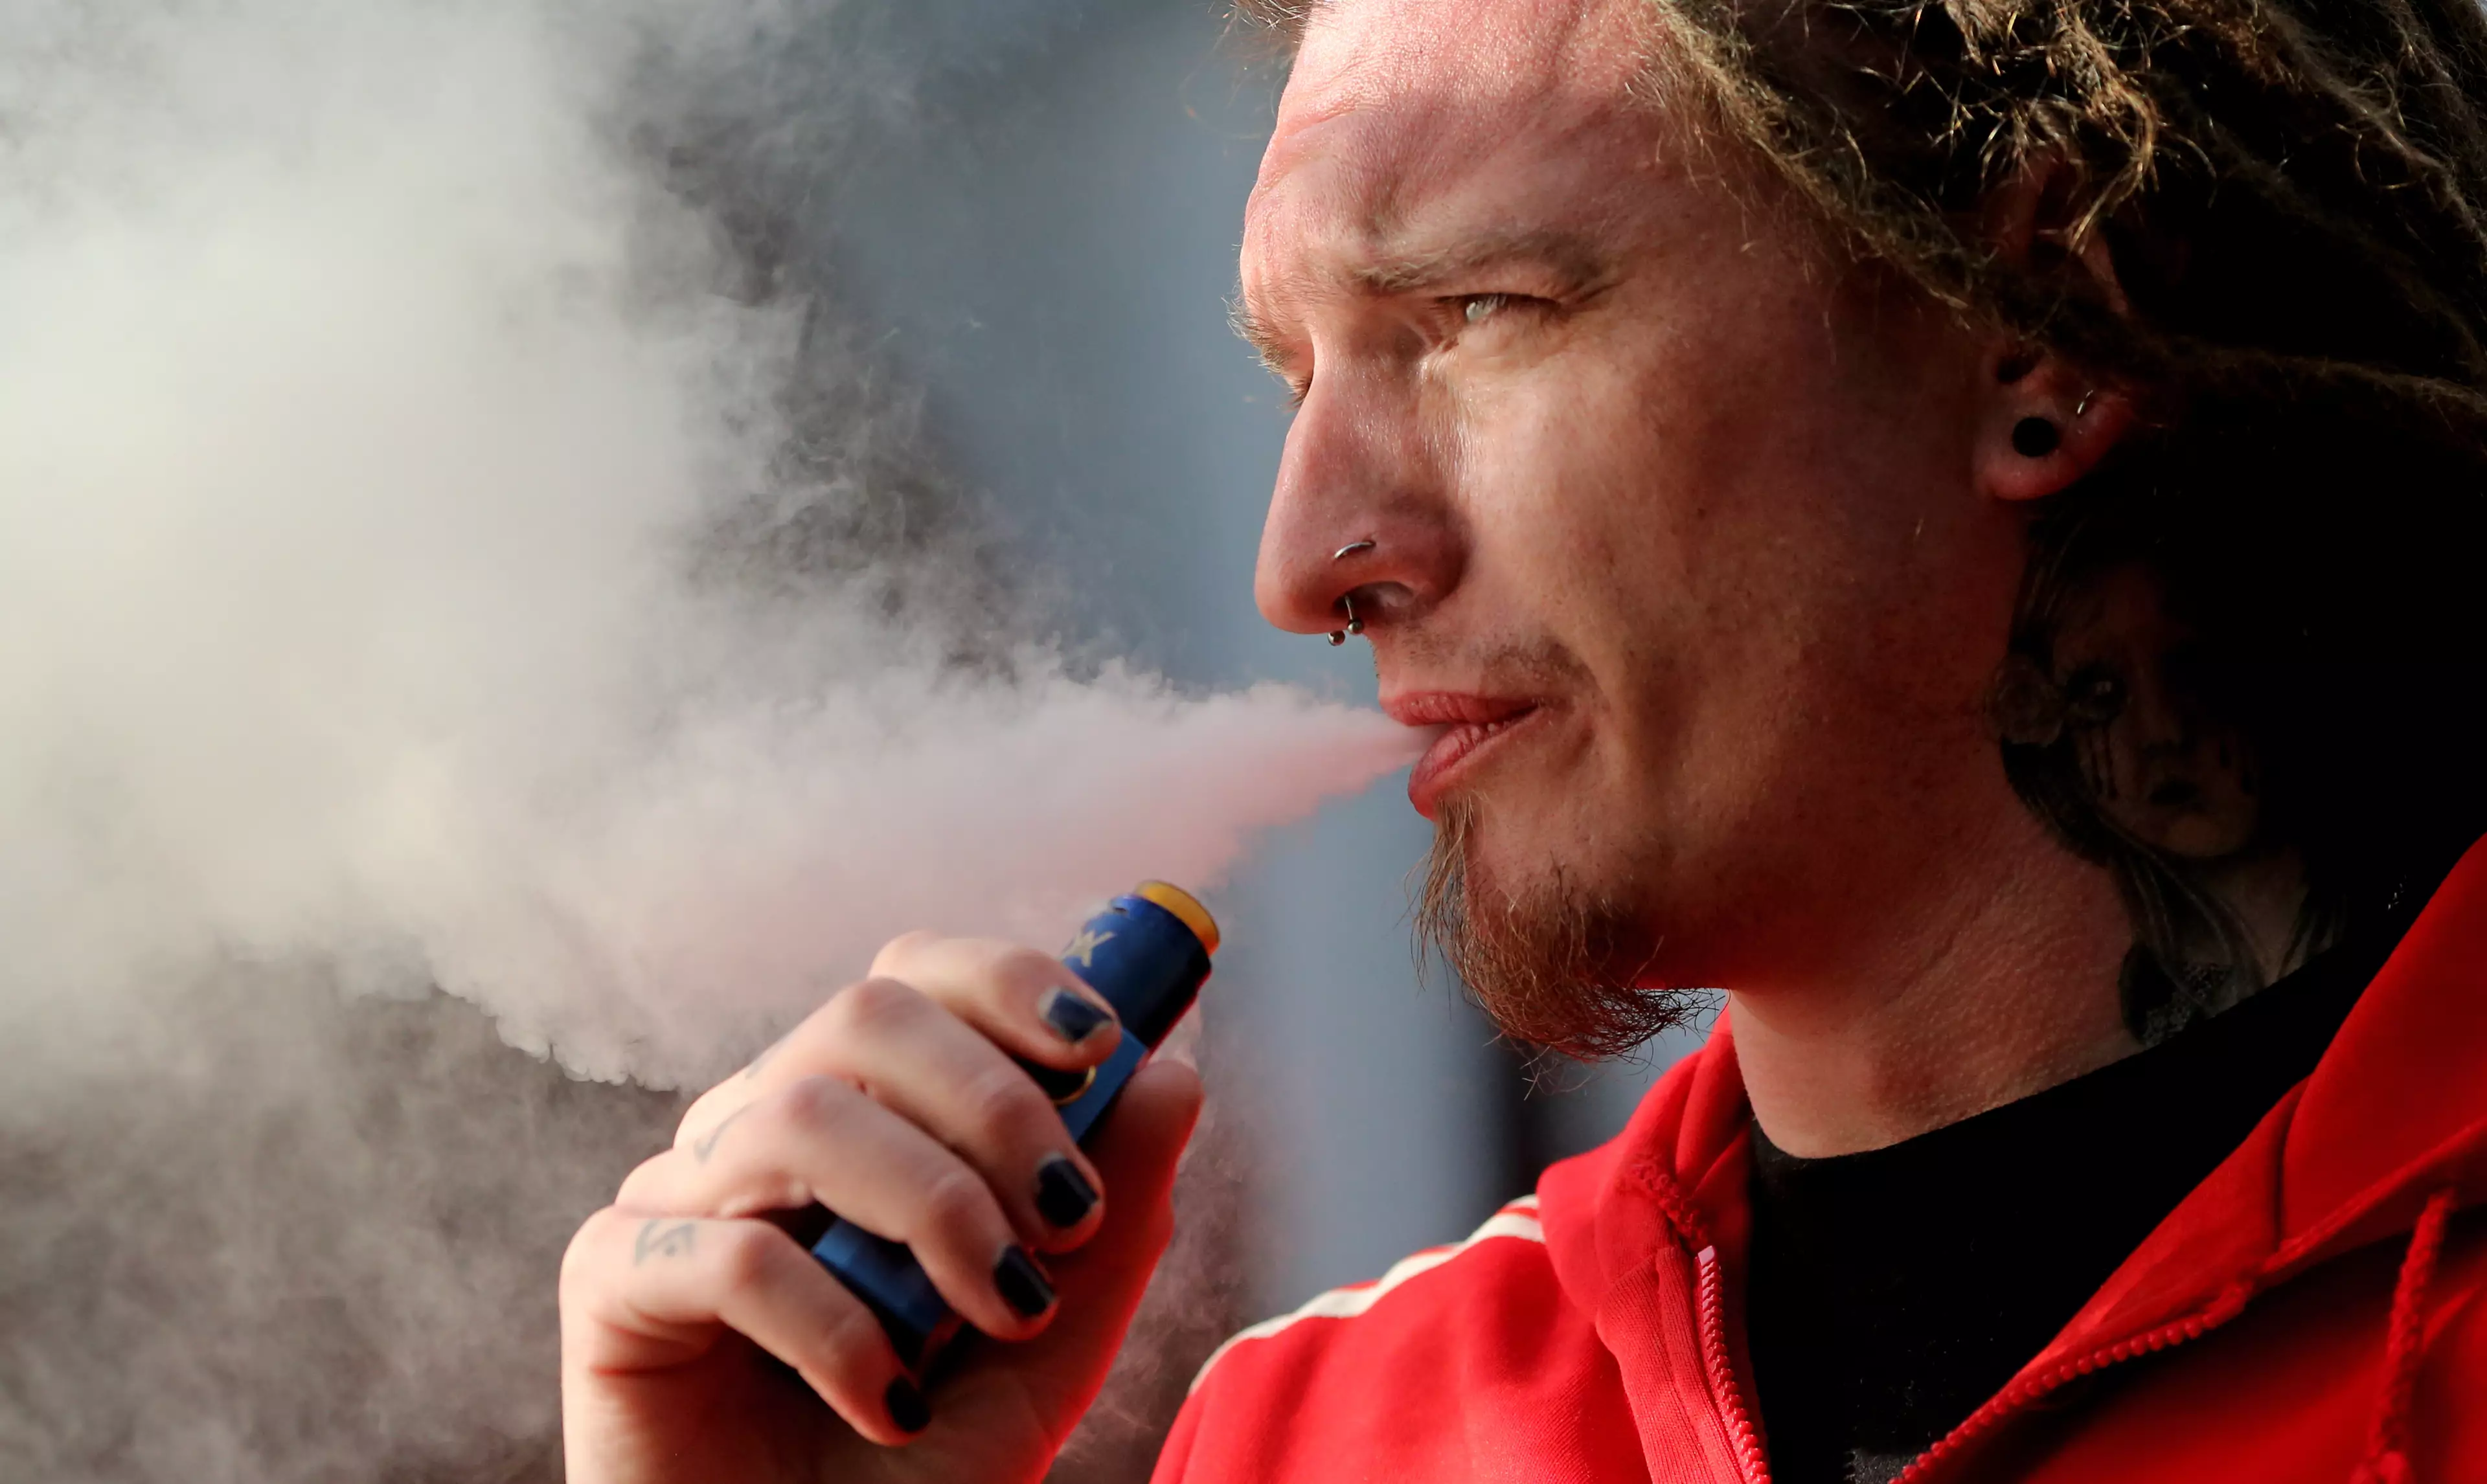 San Francisco is the first US city to ban vaping.